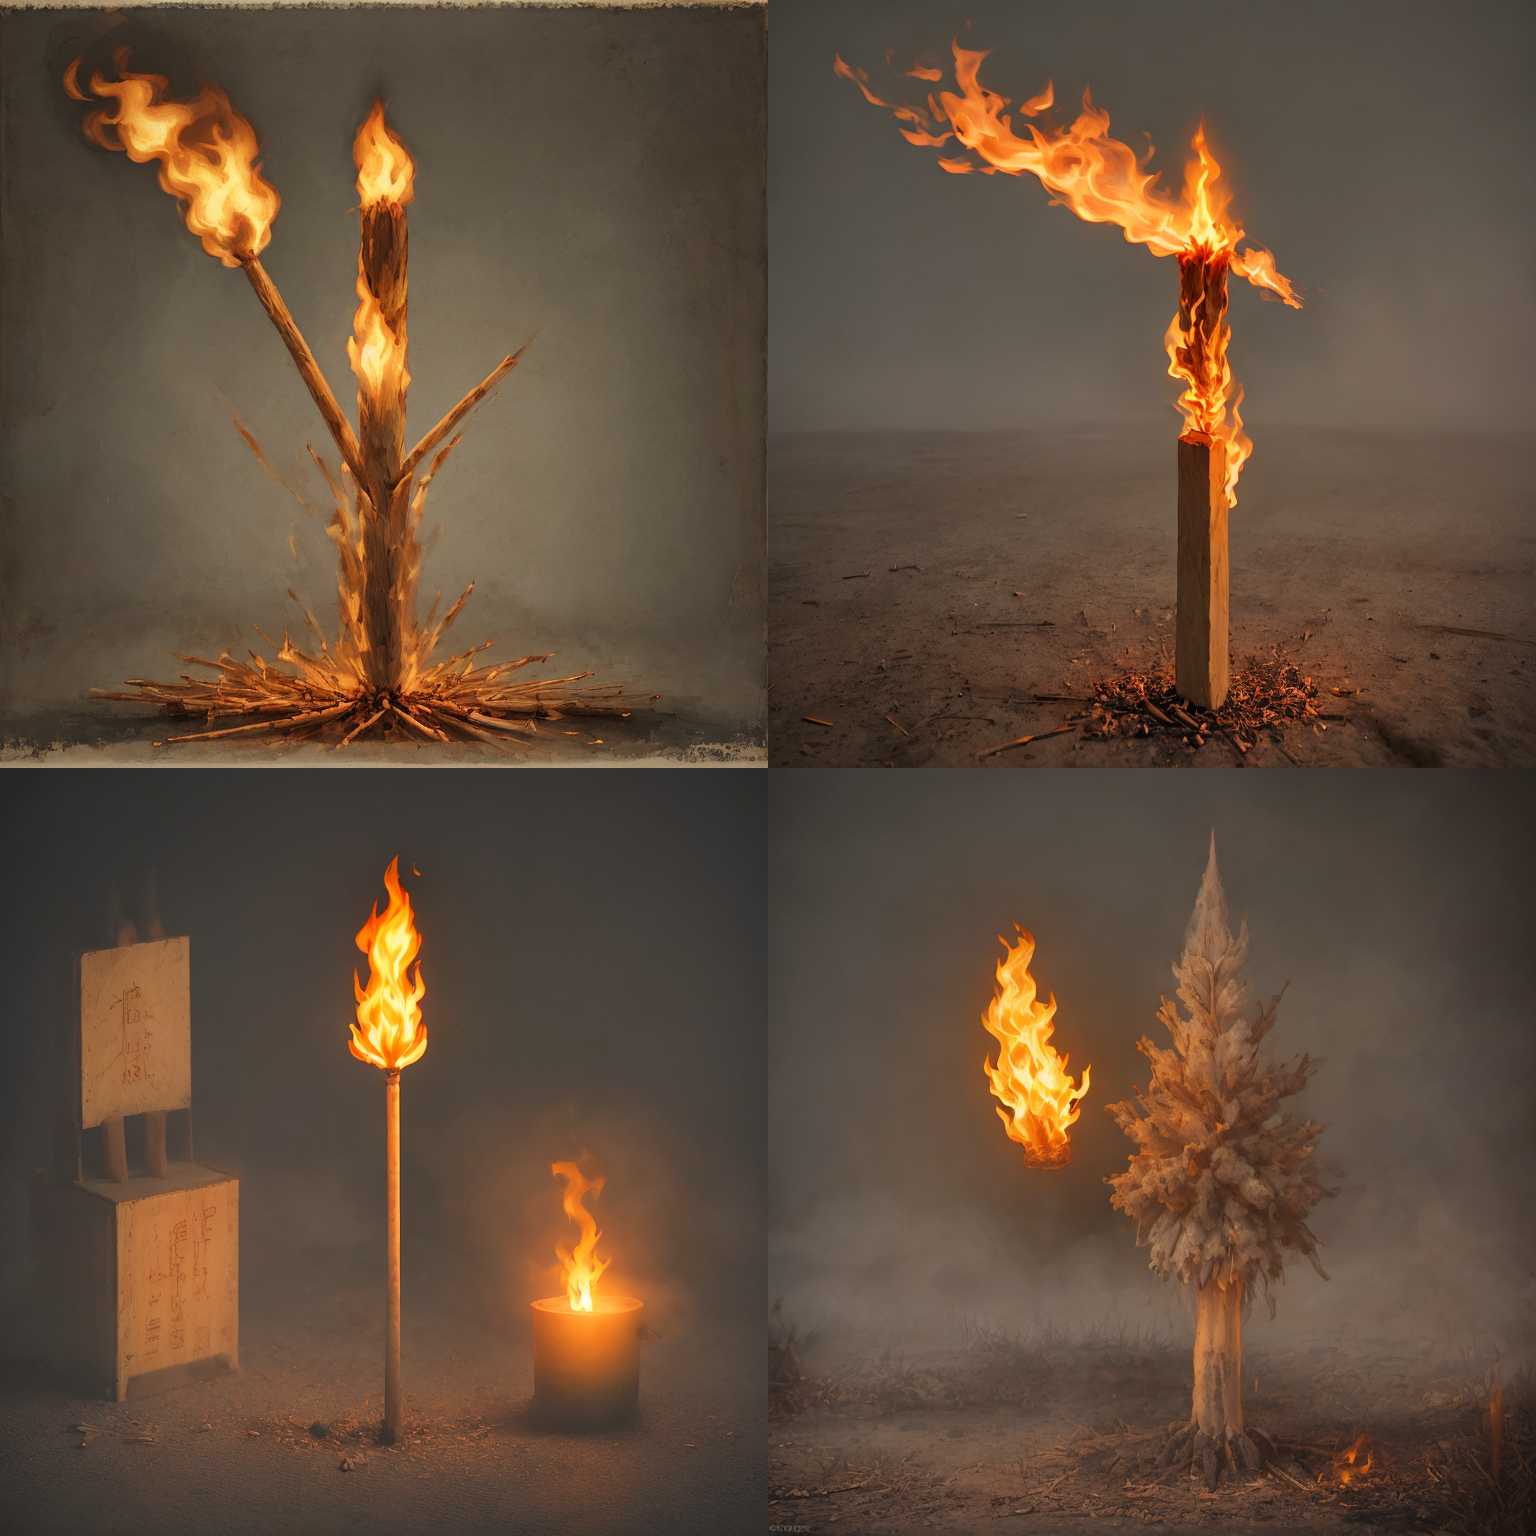 A burning matchstick in the air